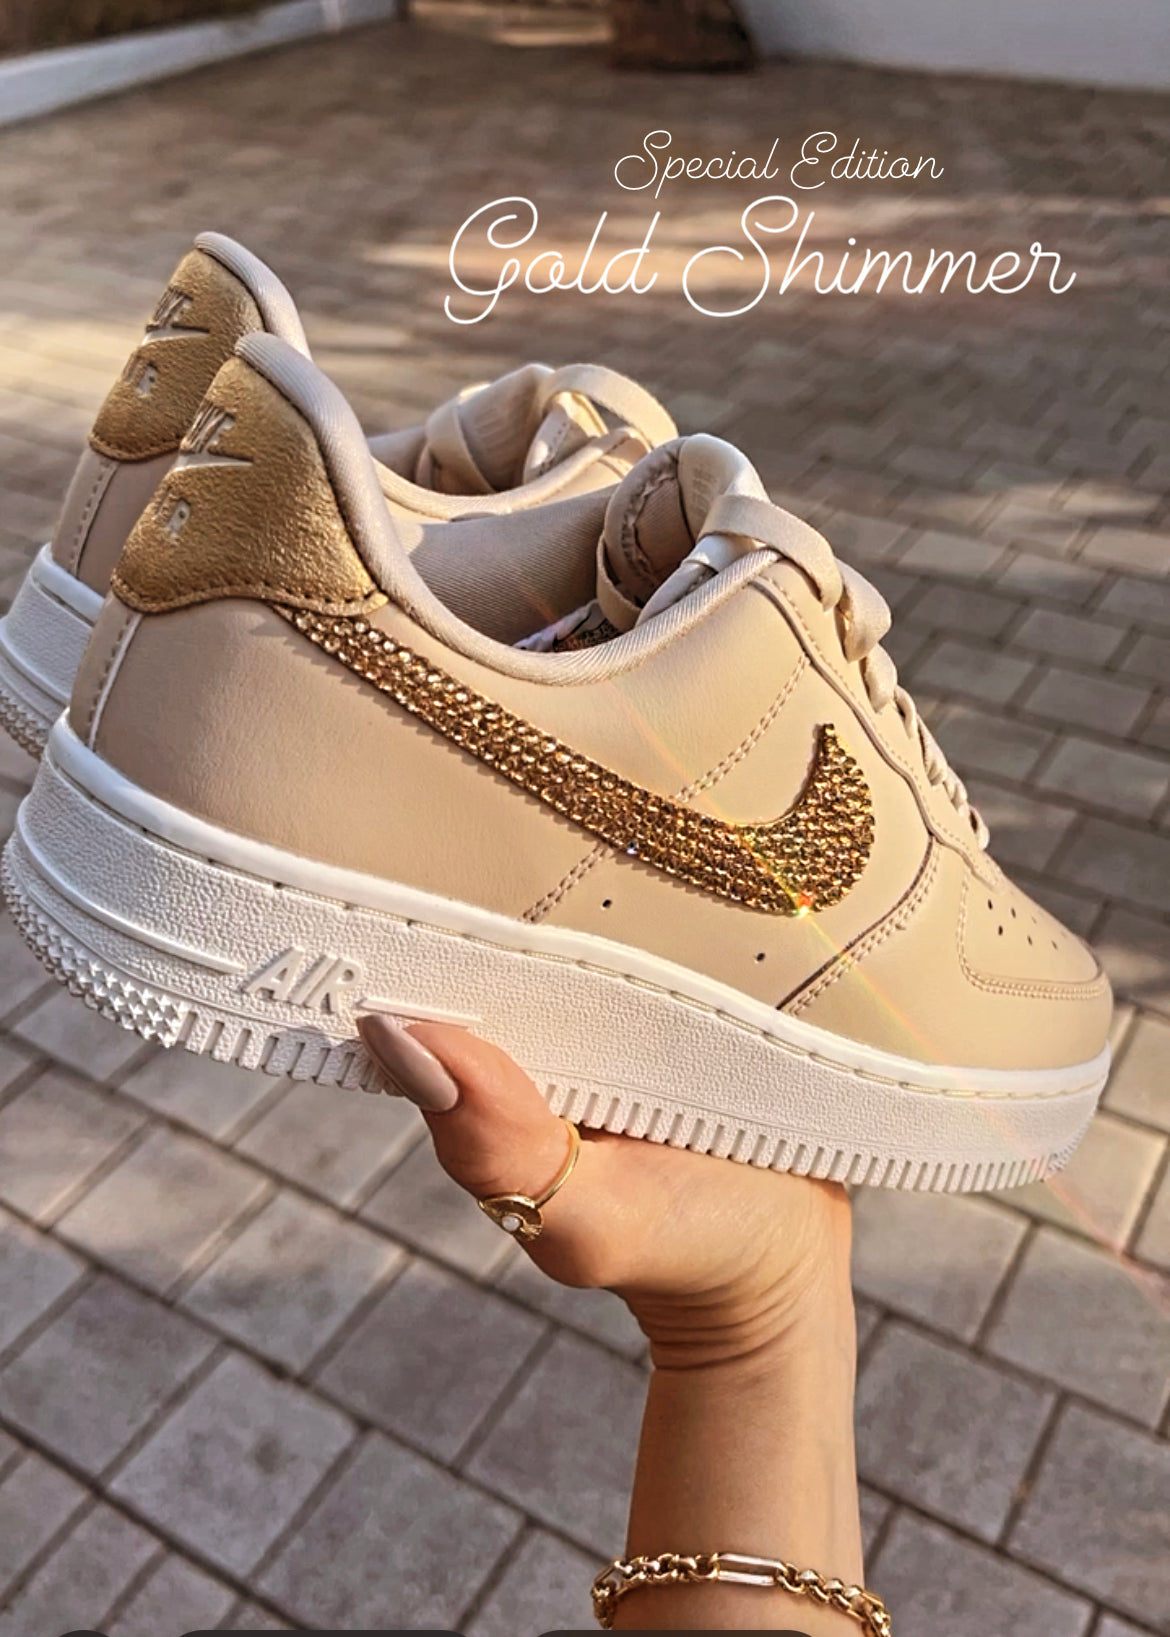 Special Edition Gold Shimmer Swarovski Nike Air Force 1